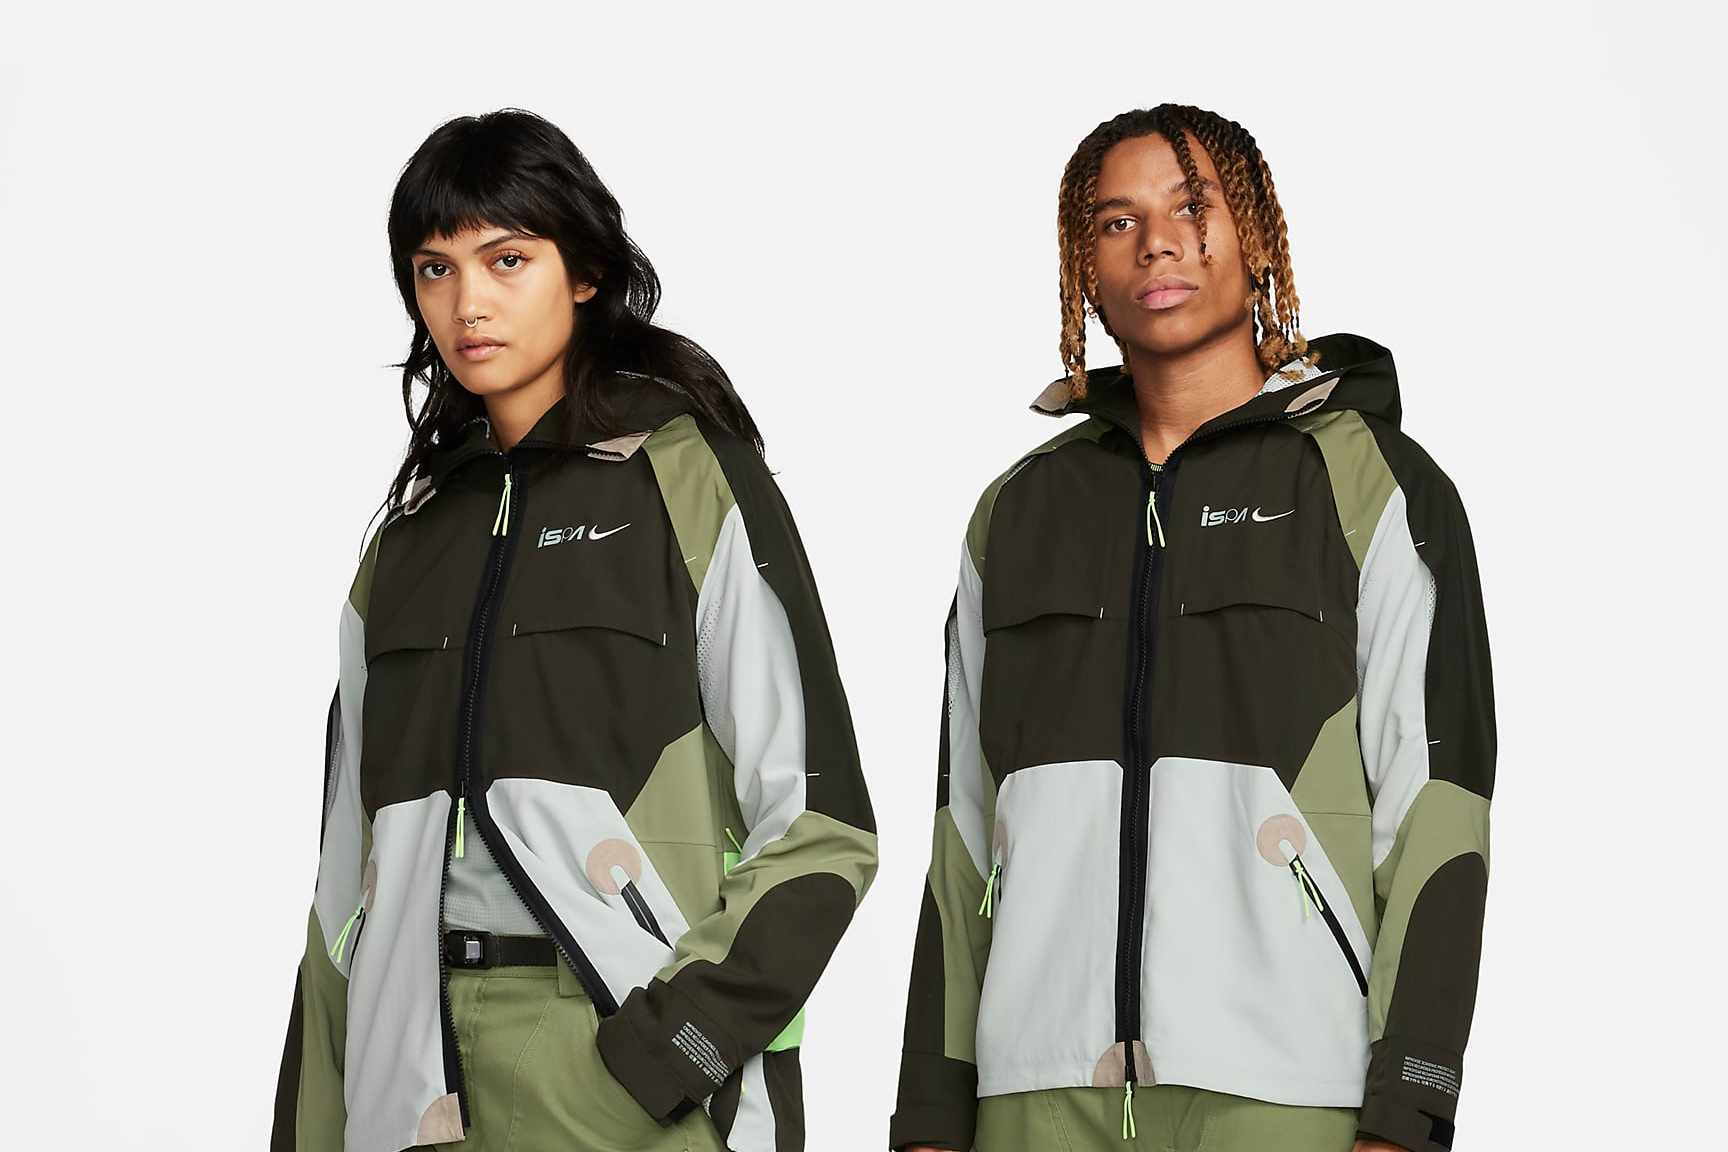 Models wear clothing from Nike ISPA's Fall 2023 collection